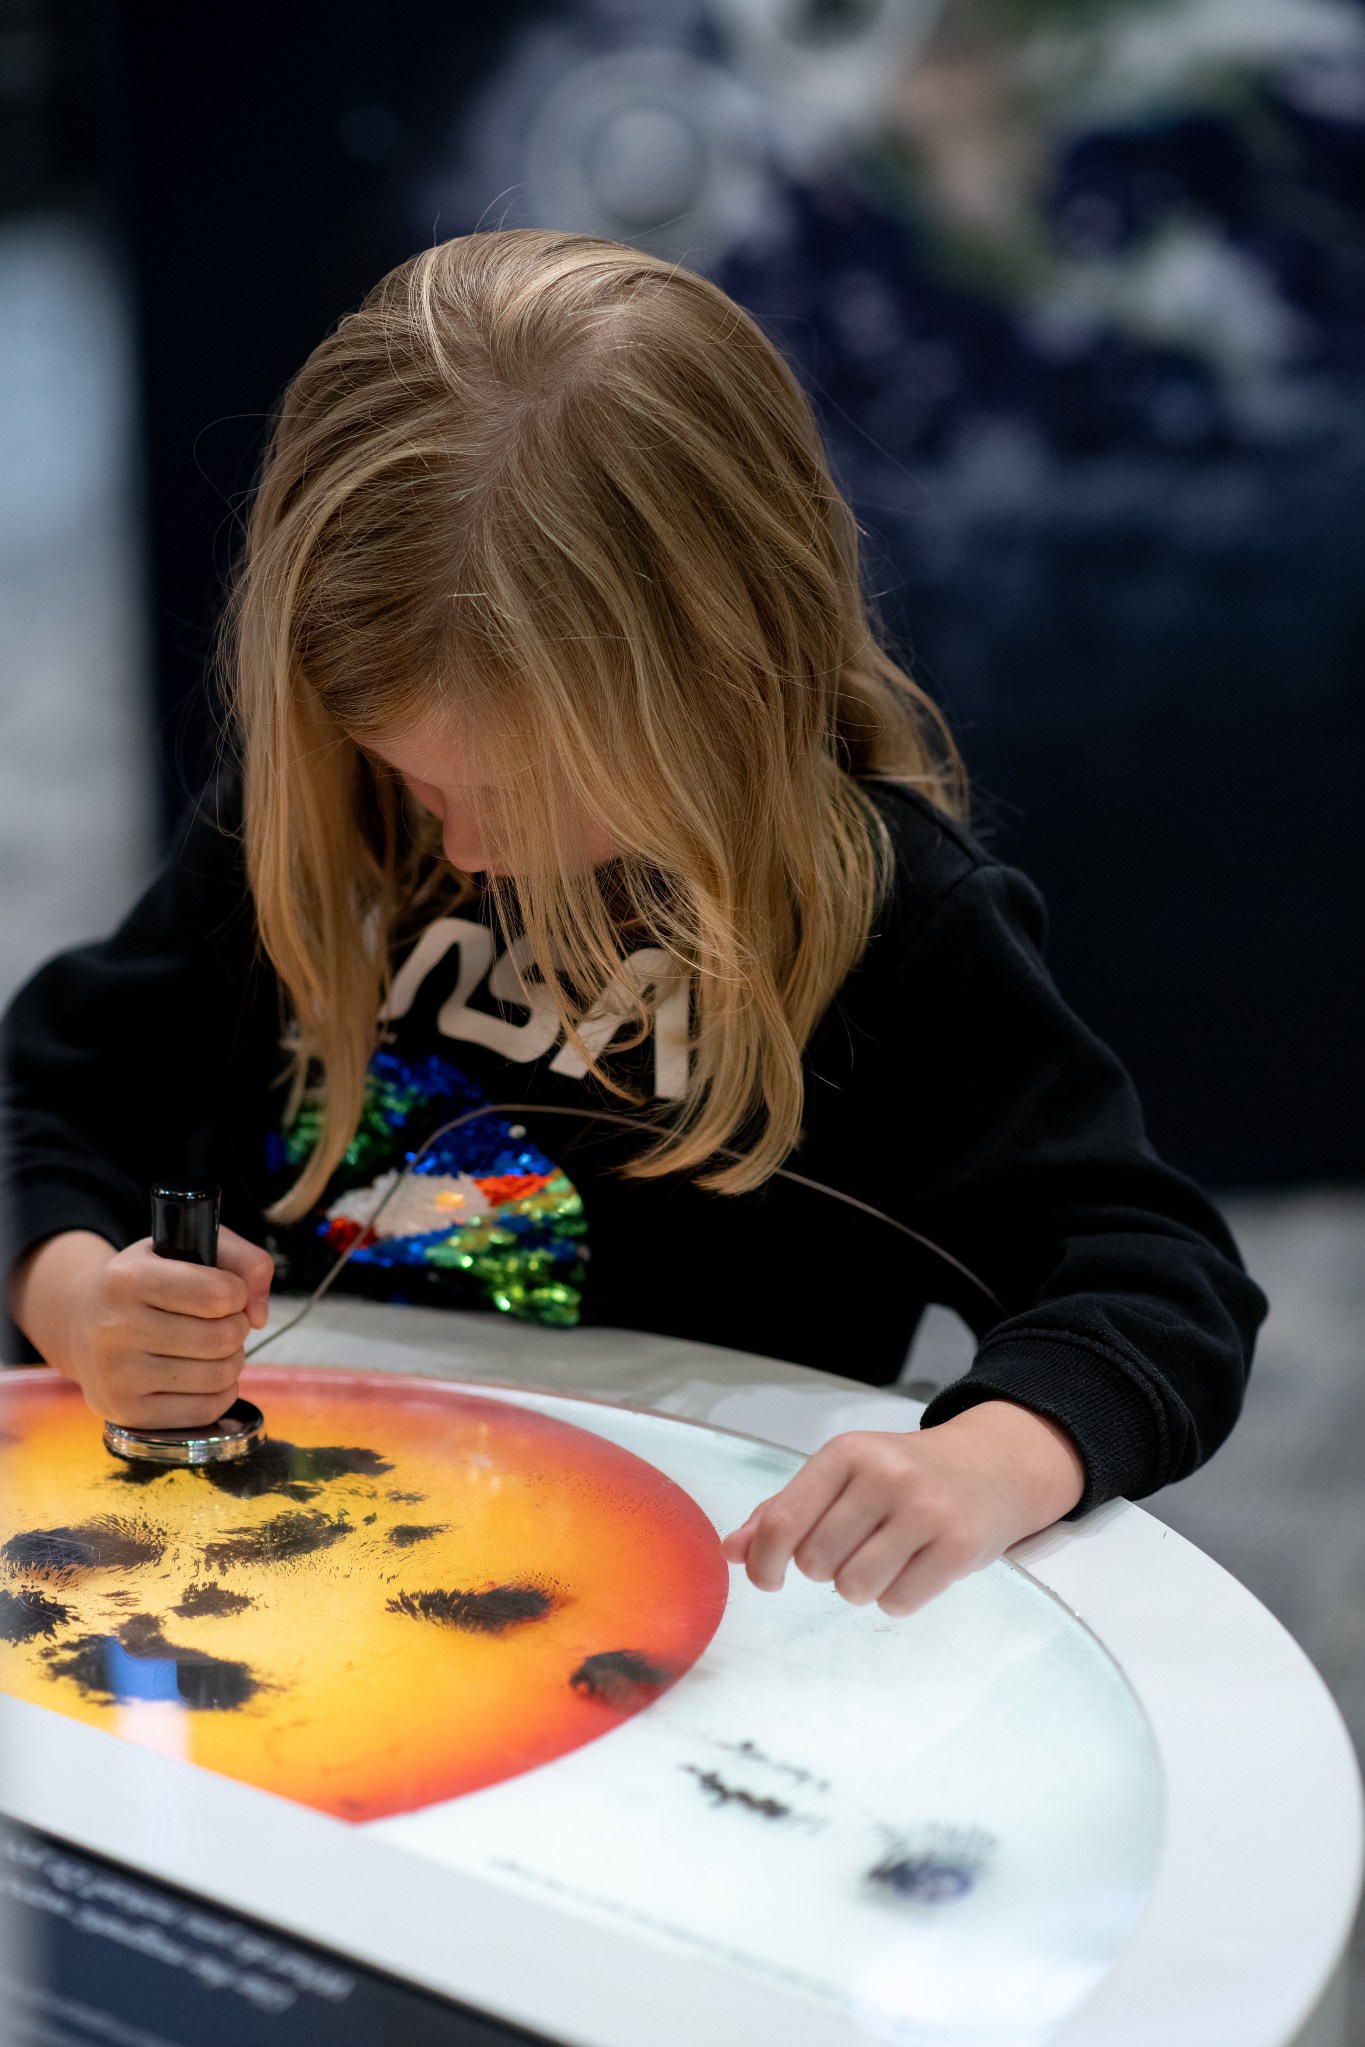 A young child interacts with a sunspot exhibit.